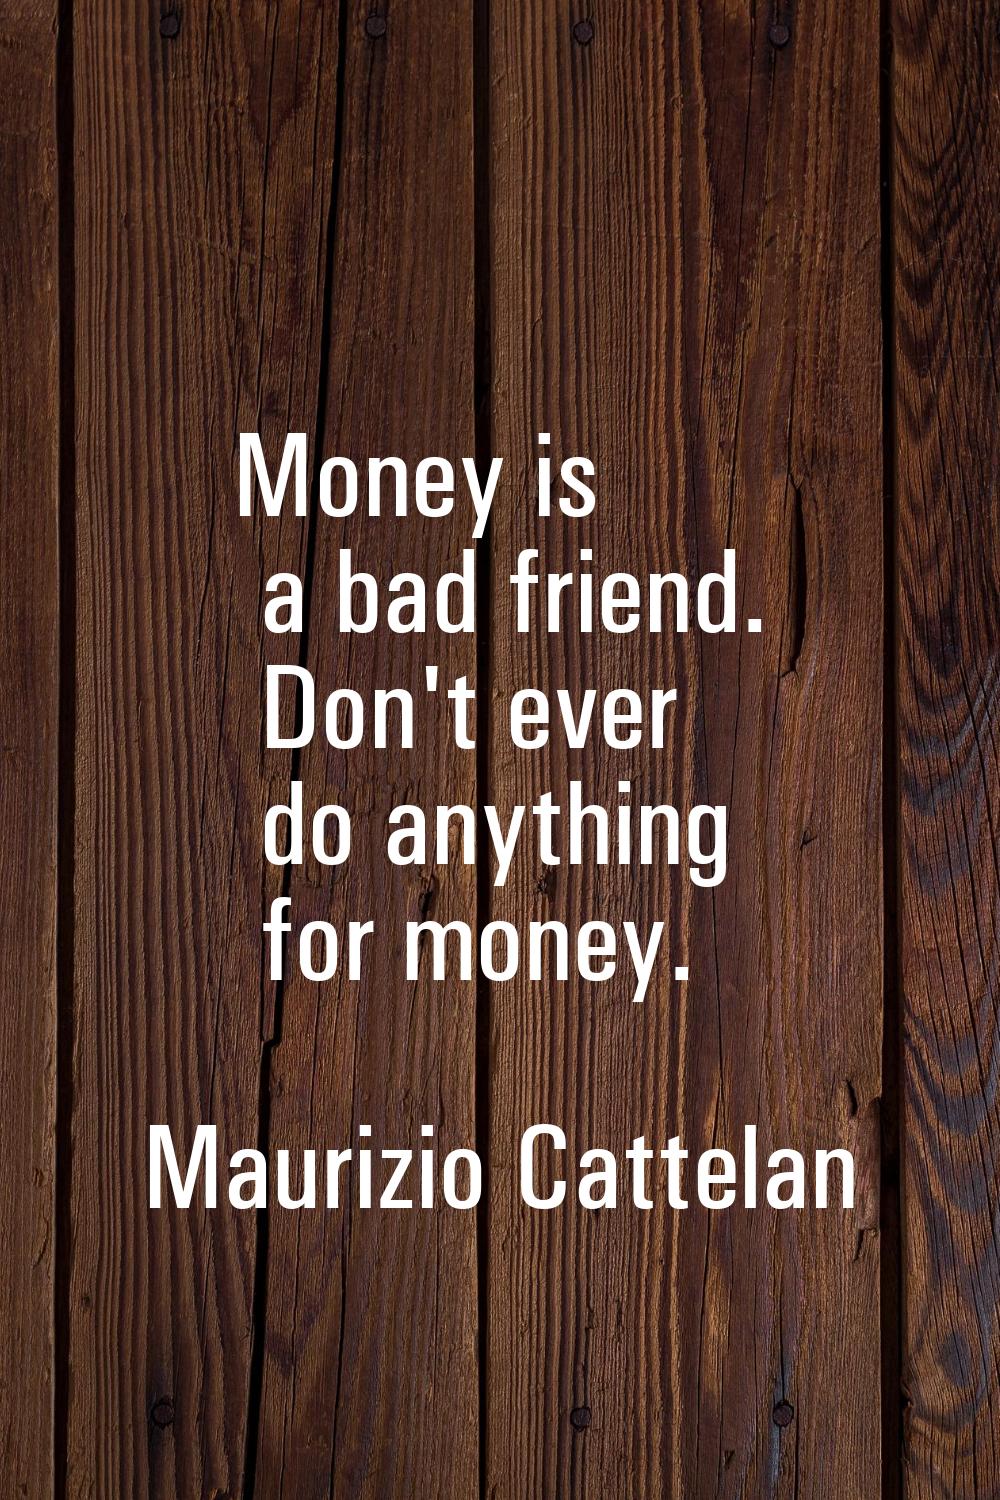 Money is a bad friend. Don't ever do anything for money.